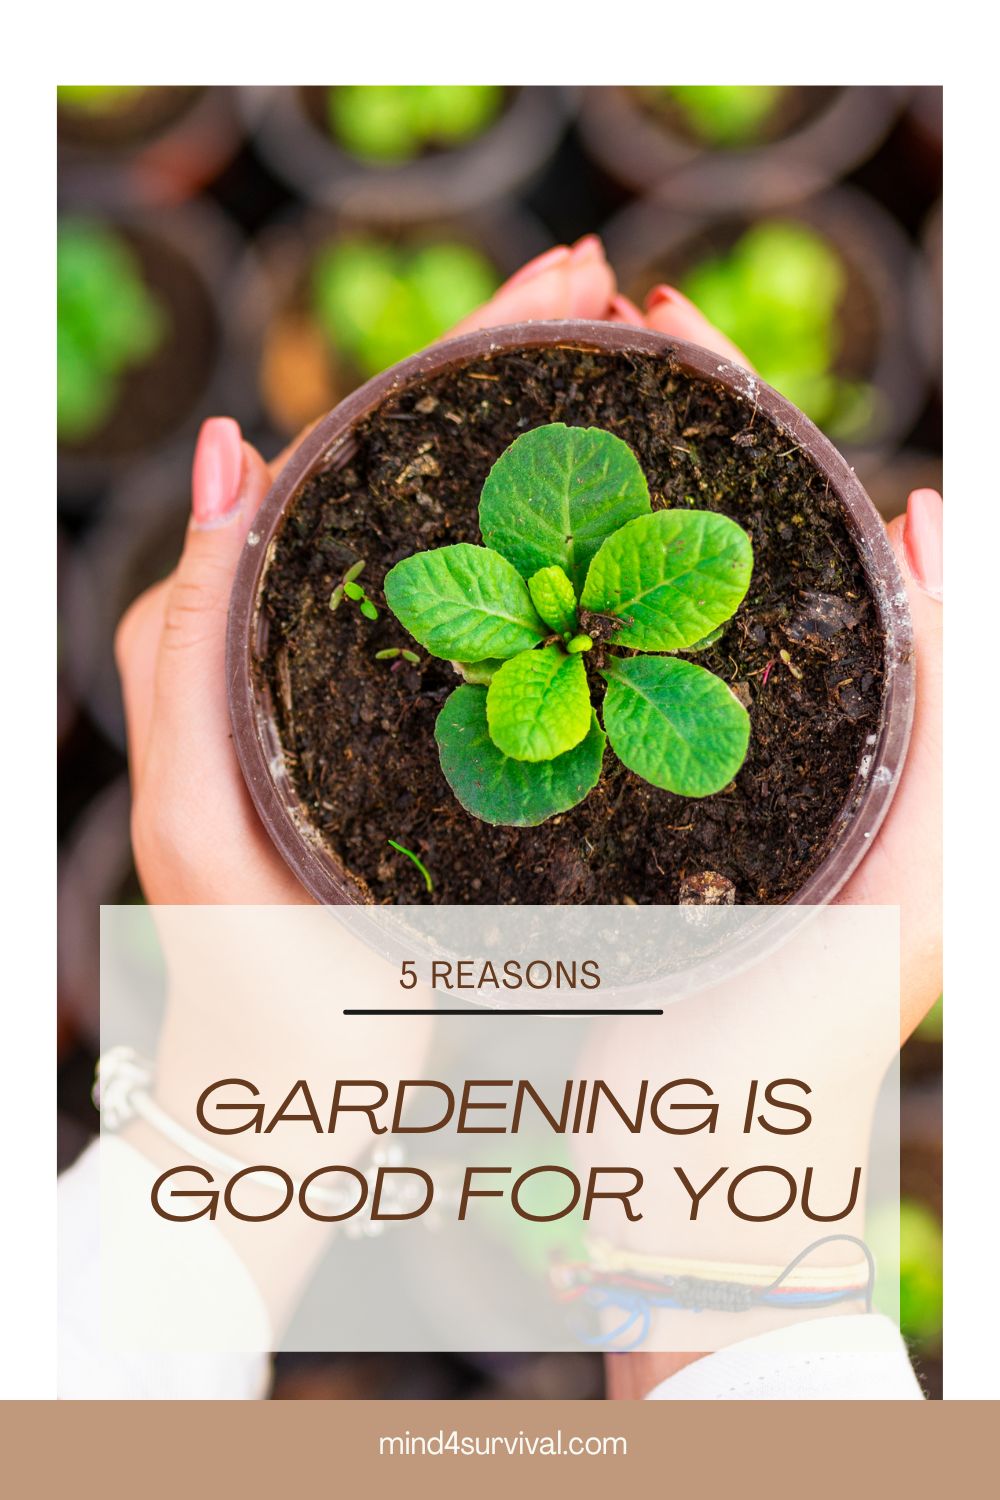 5 Reasons Gardening is Good For You